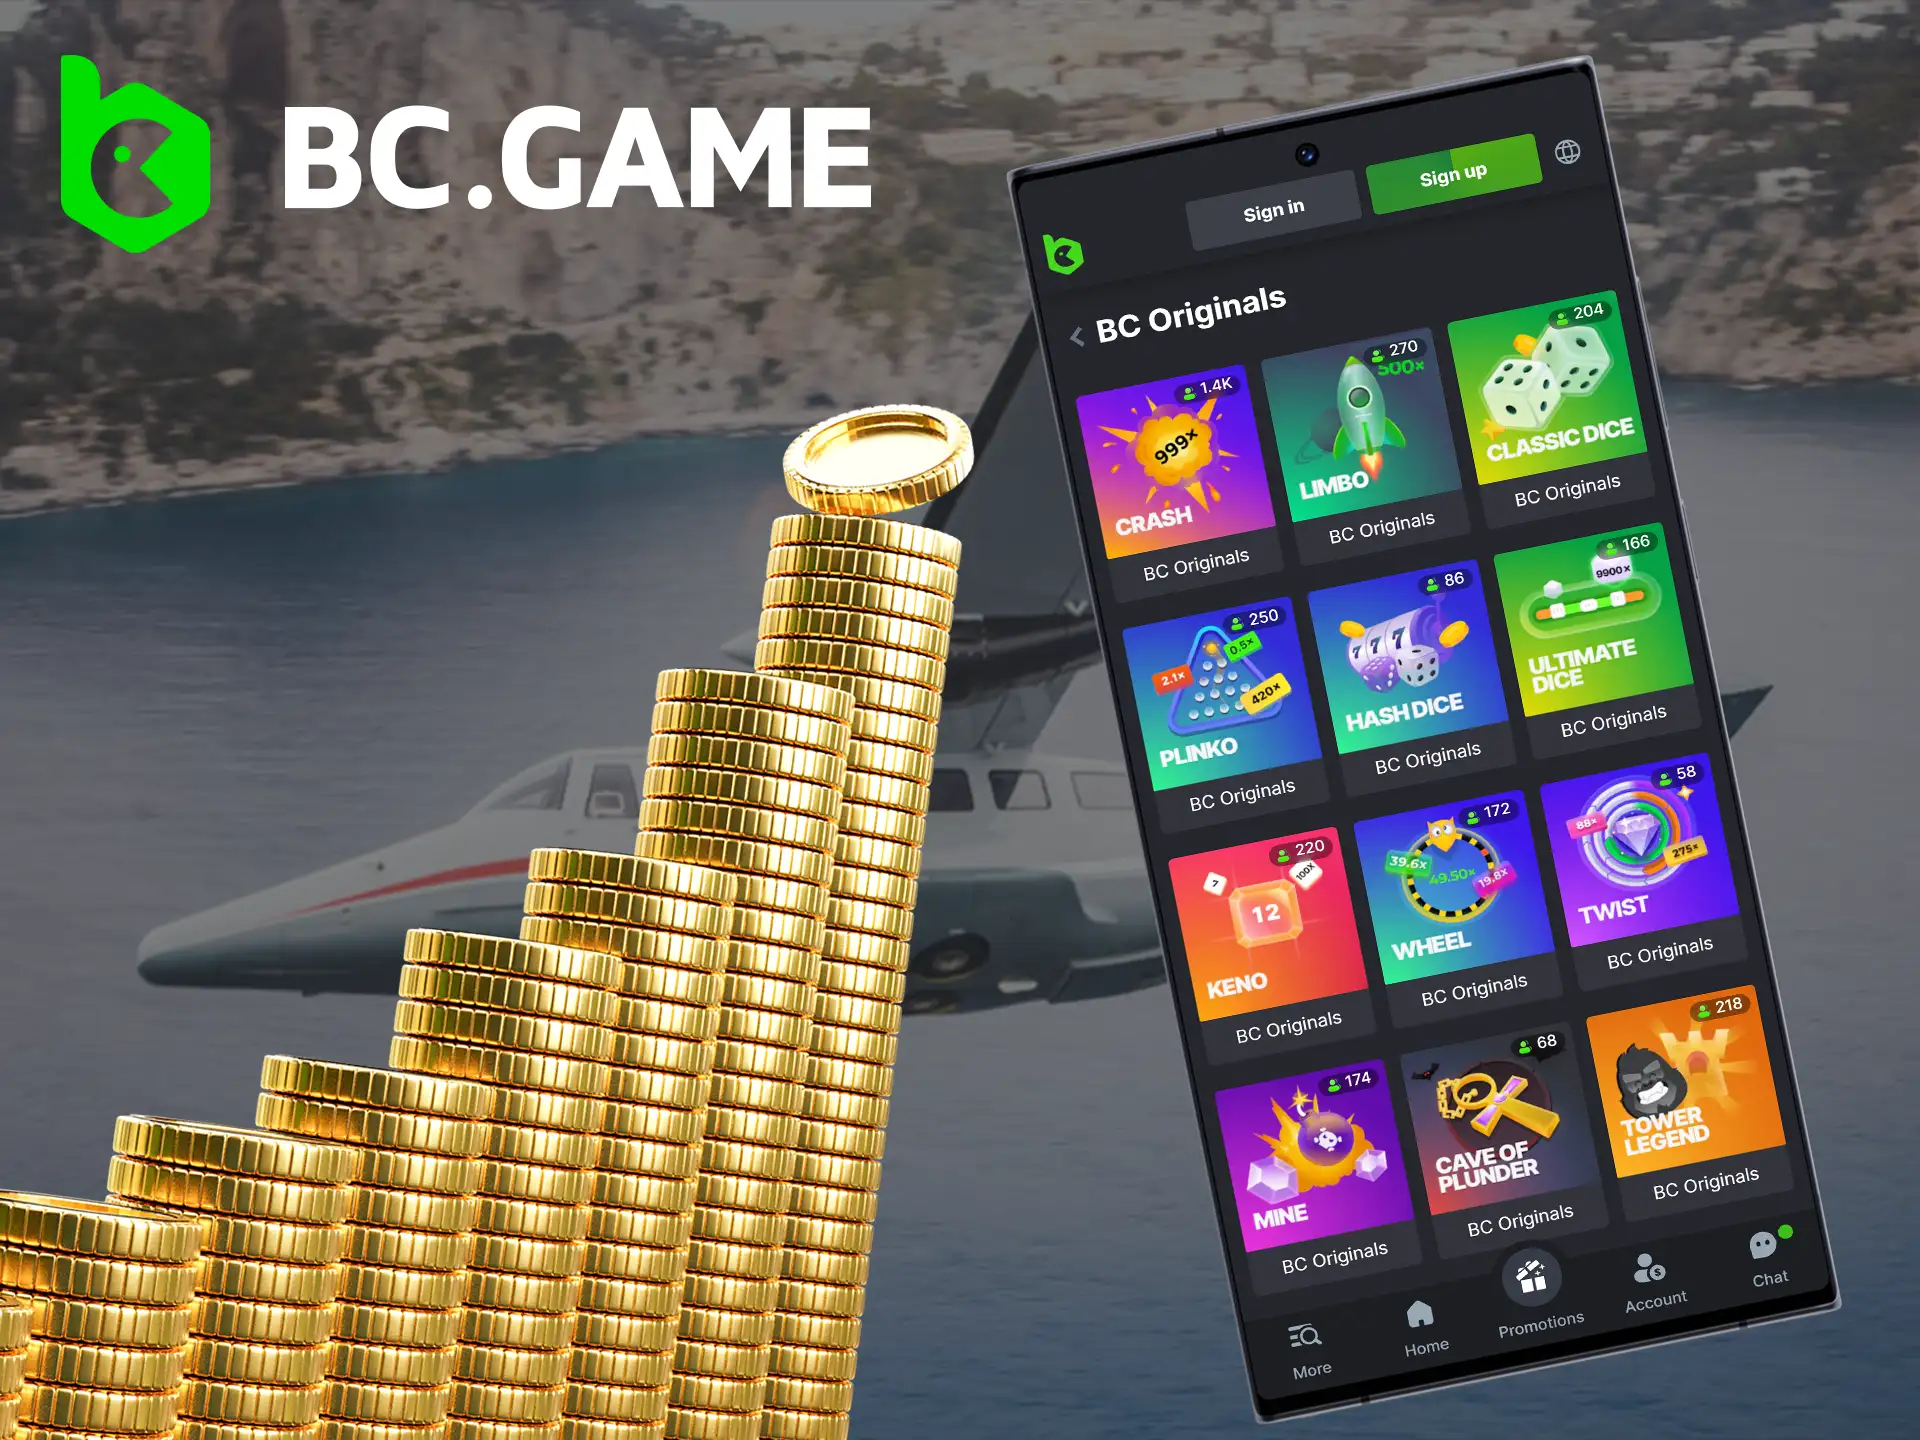 The BC.Game mobile app offers an alternative to Aviator.